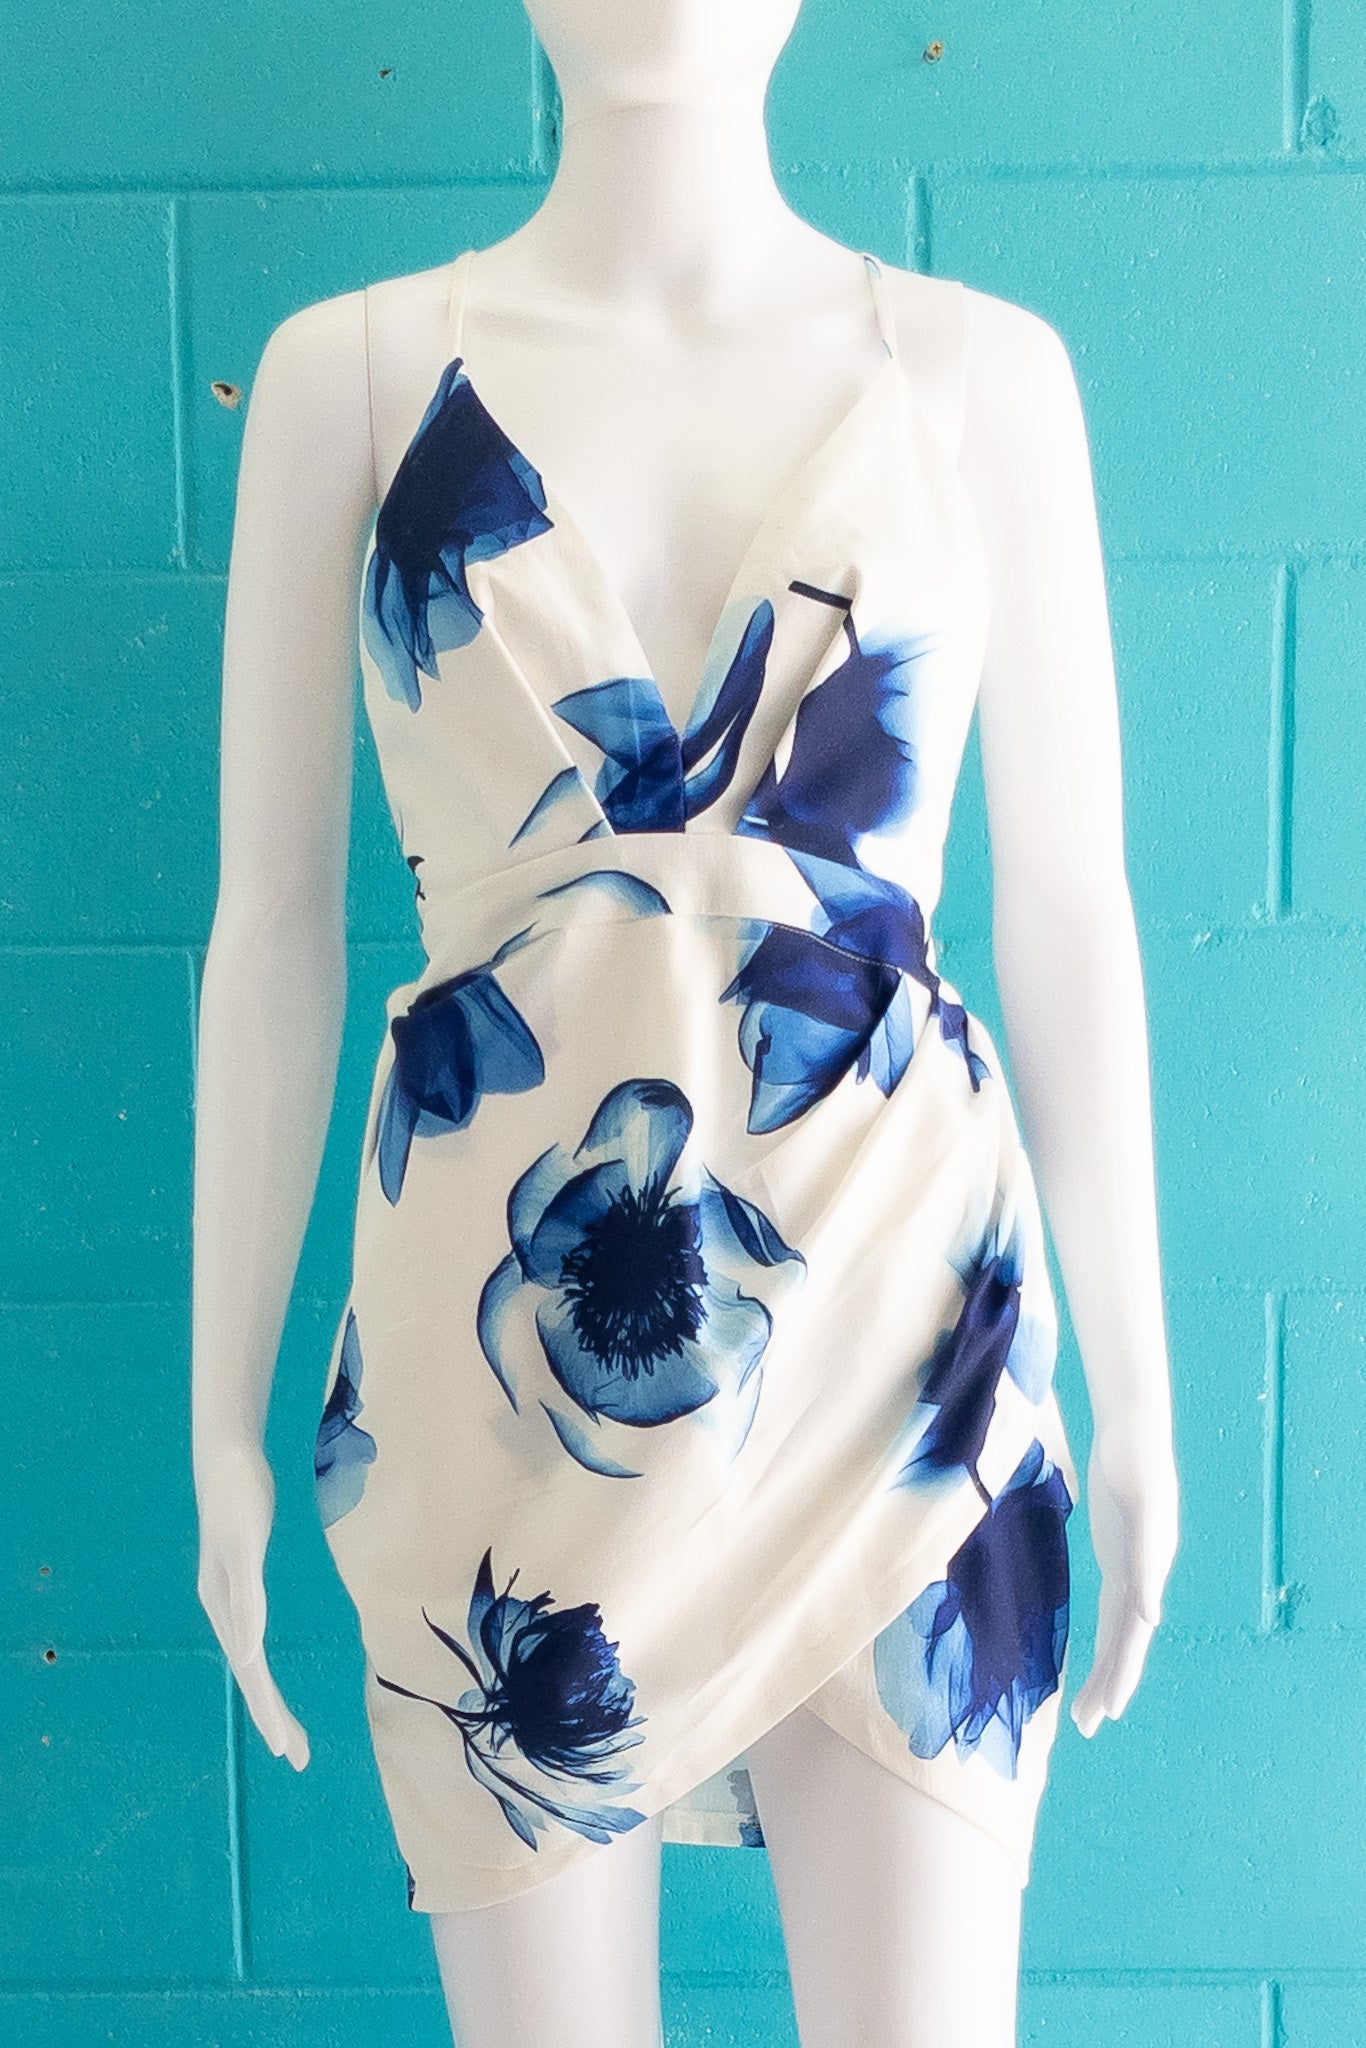 BNWT HEART ON FIRE White Blue Floral Summer Party Dress - Size 10